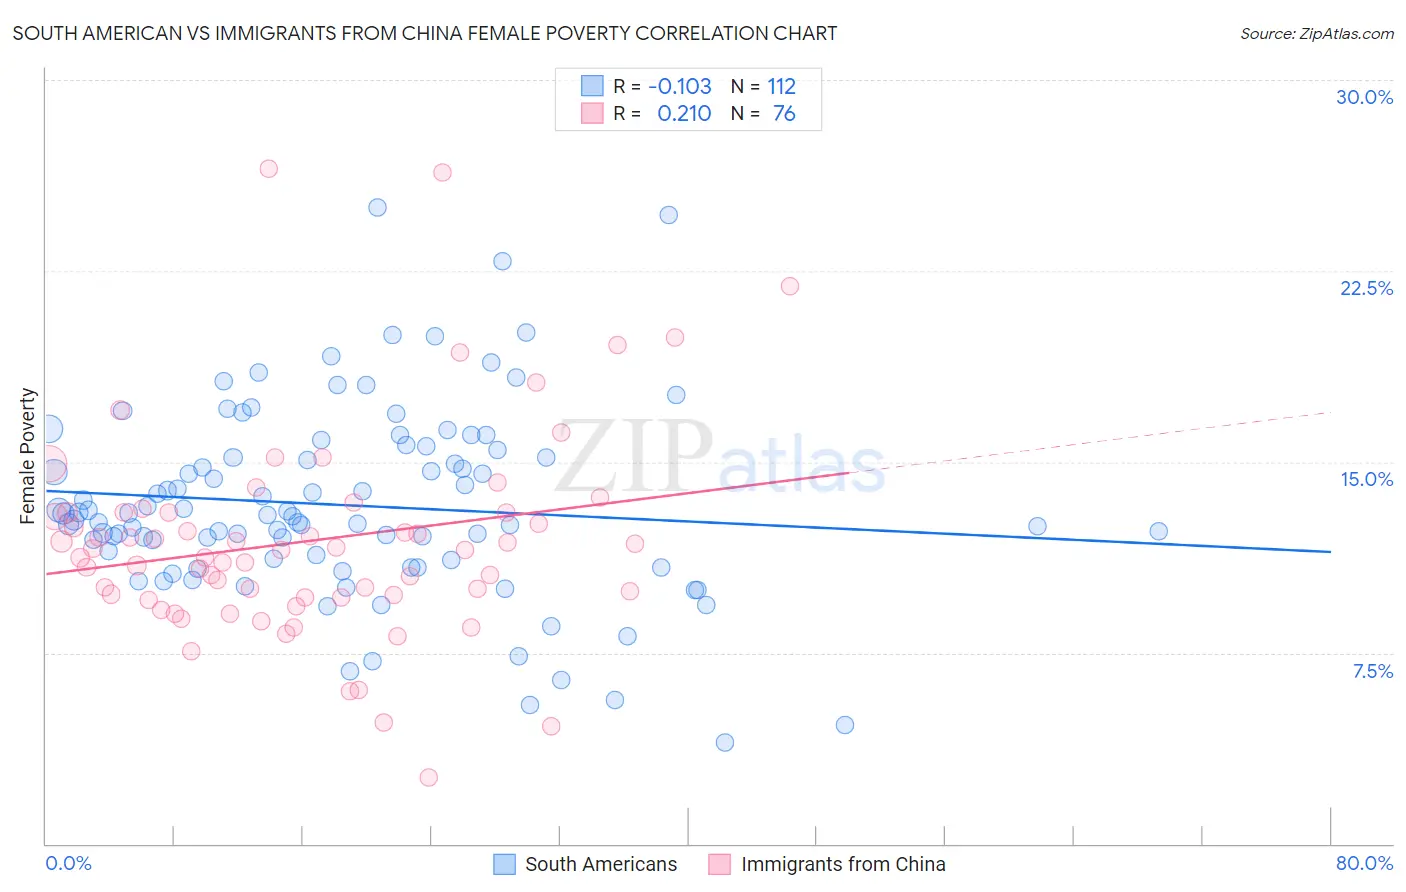 South American vs Immigrants from China Female Poverty